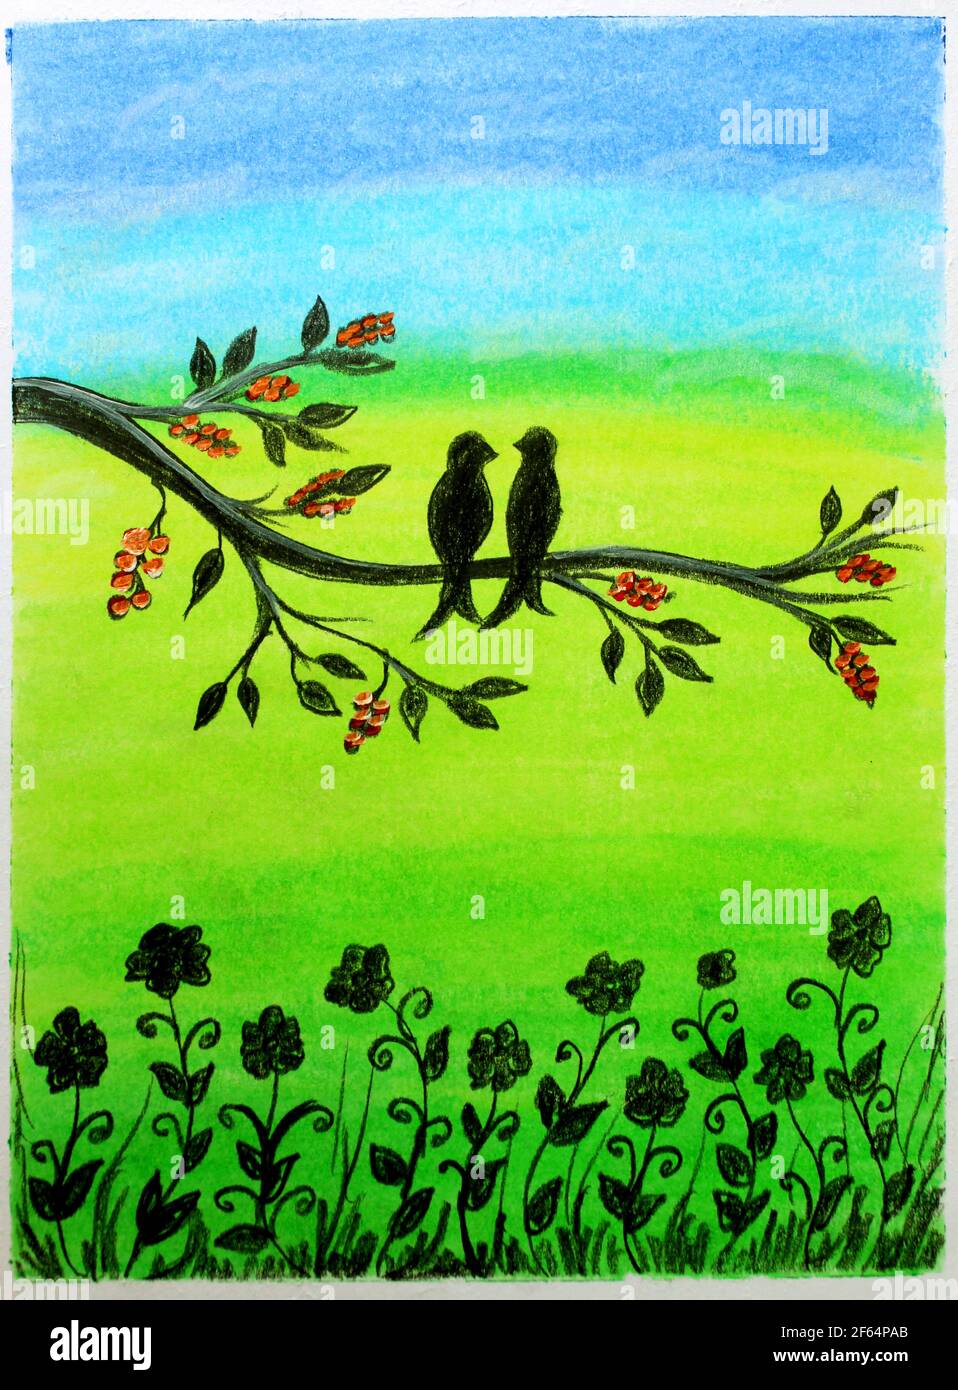 Love bird Scenery drawing with green nature background, silhouette ...